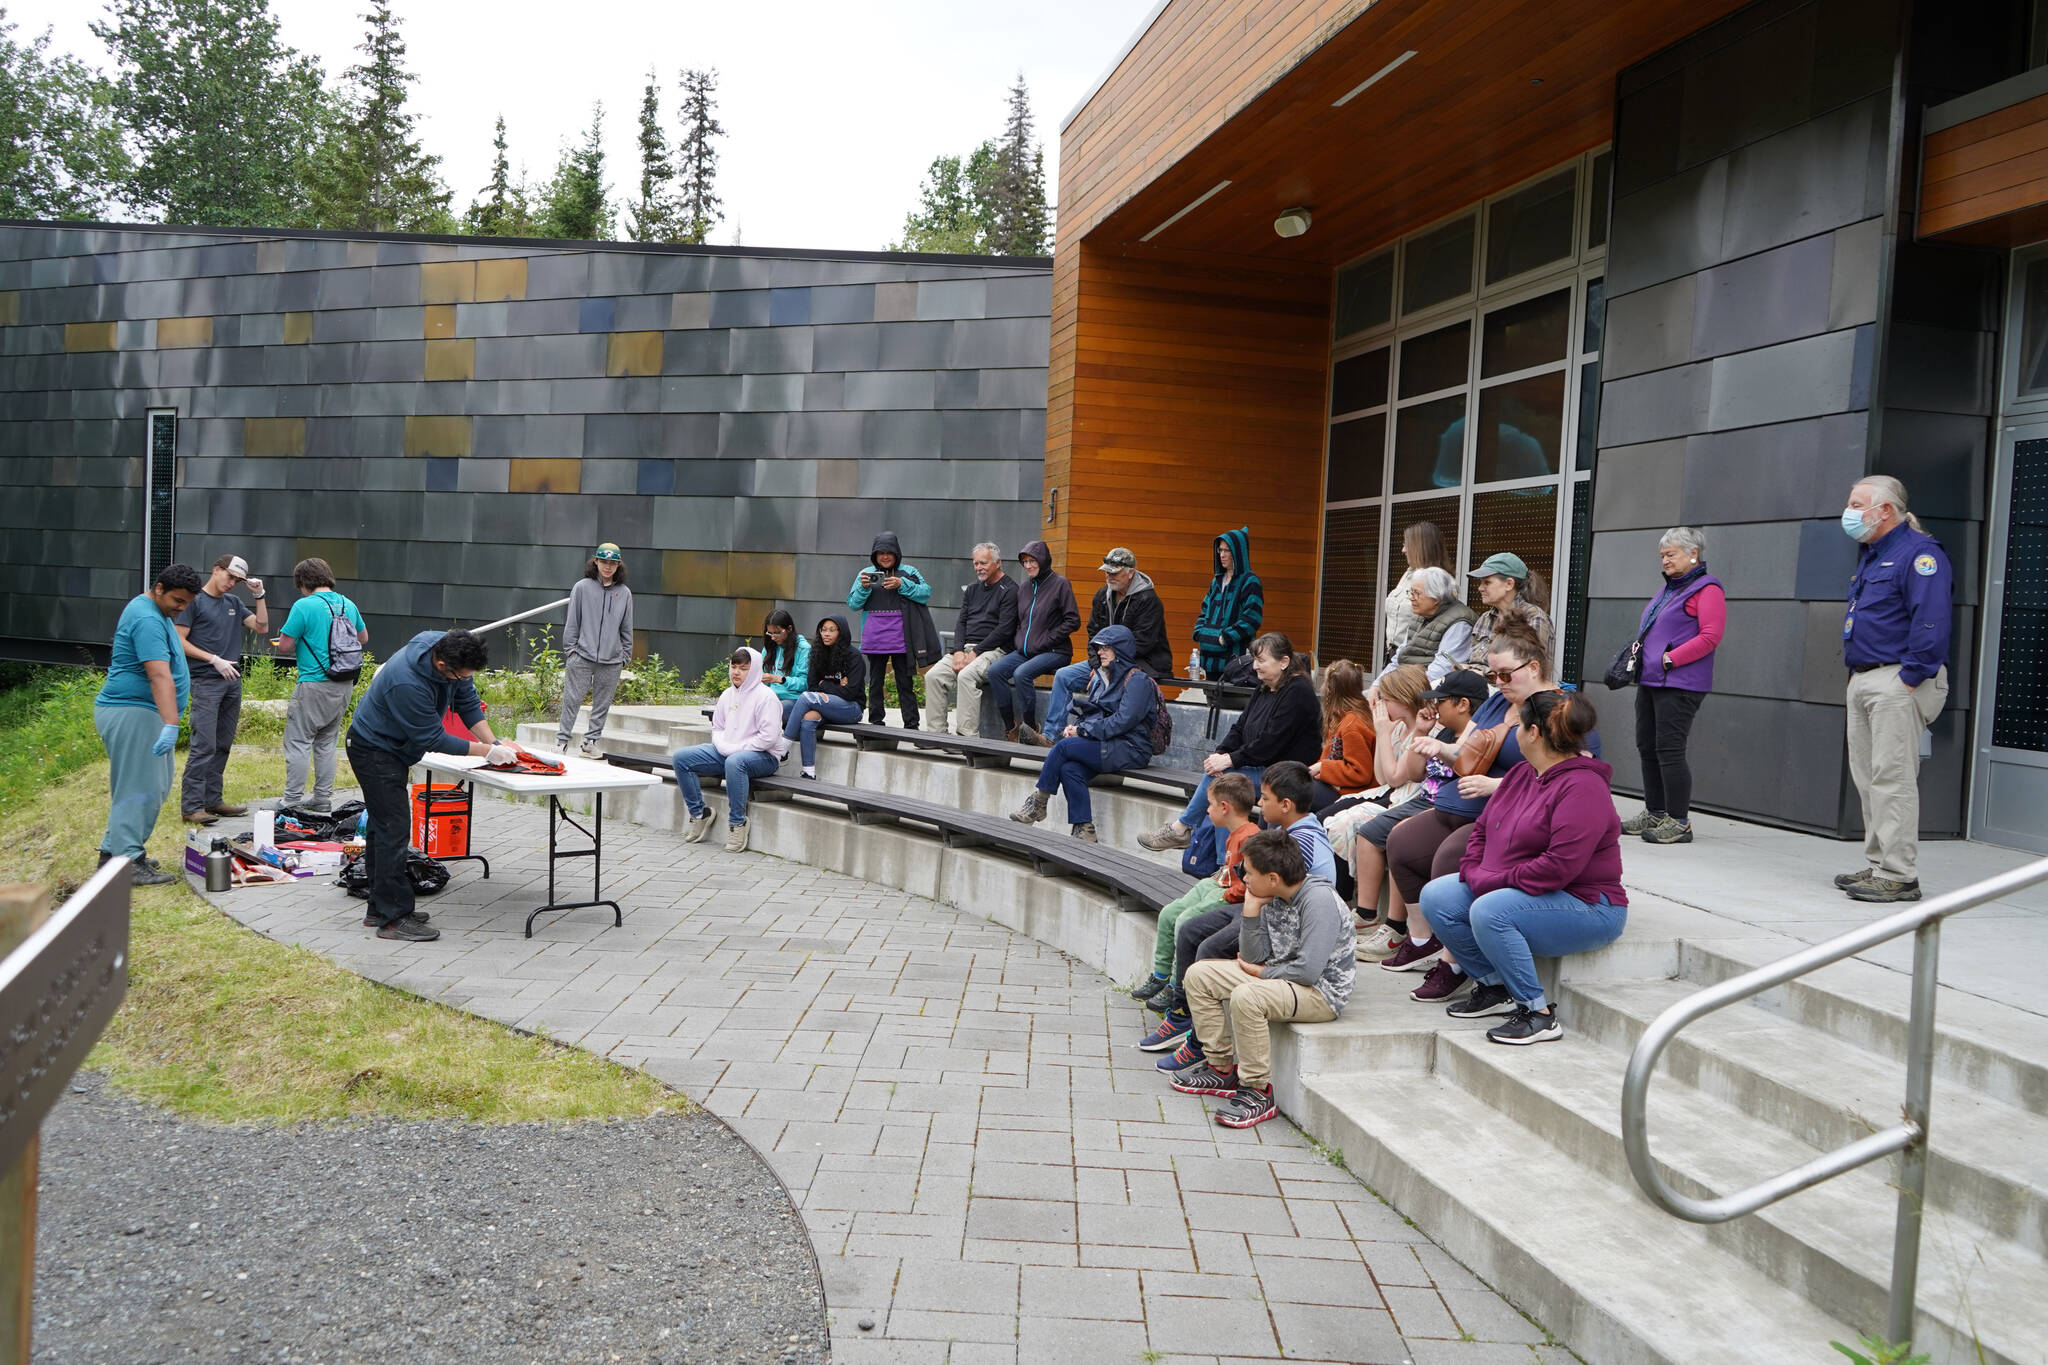 A crowd watches a smoked salmon demonstration, part of Fish Week 2023, on Wednesday, July 19, 2023, at the Kenai National Wildlife Refuge Visitor Center in Soldotna, Alaska. (Jake Dye/Peninsula Clarion)